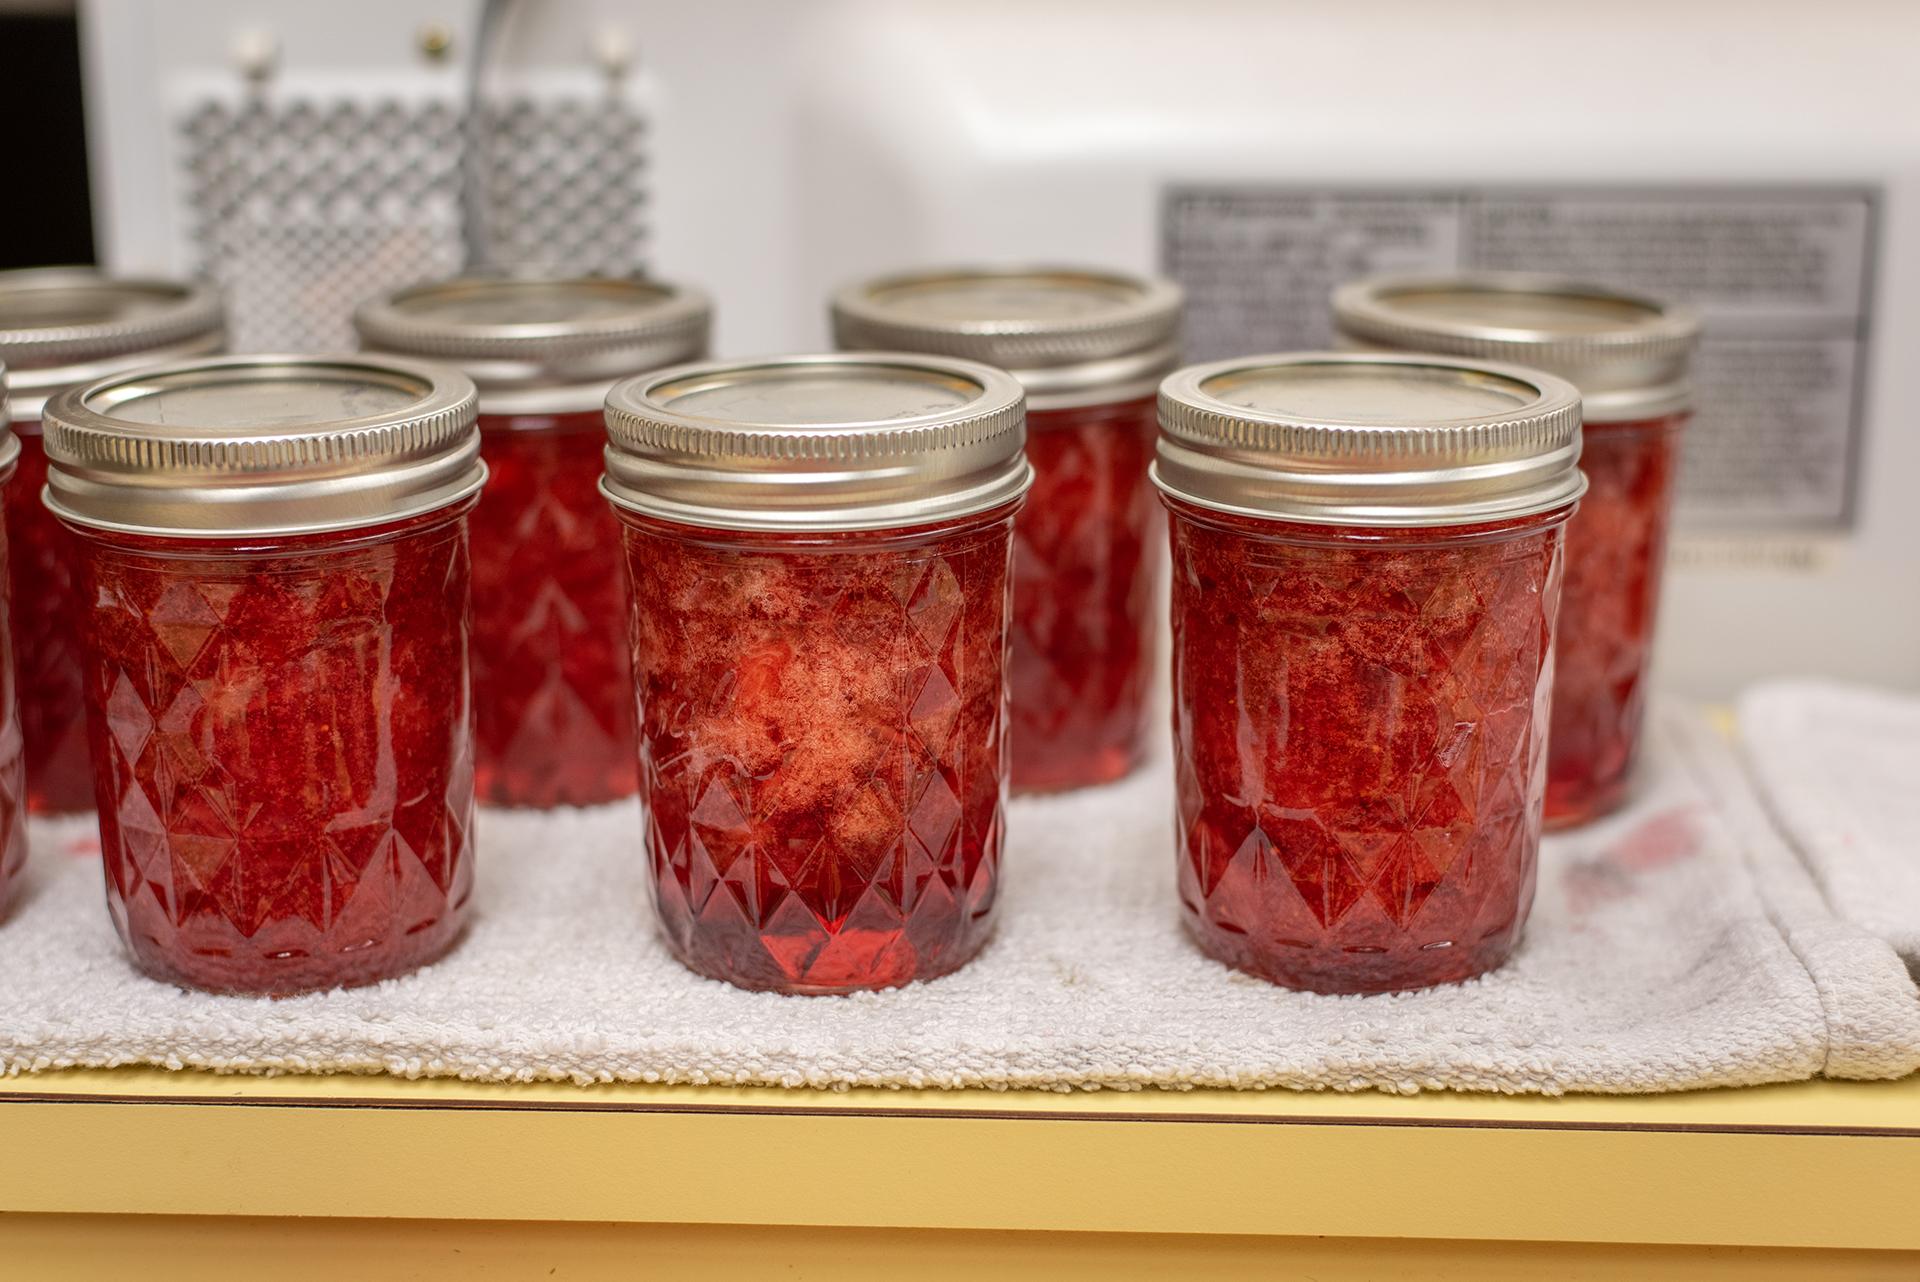 Jars of red jam on a white table